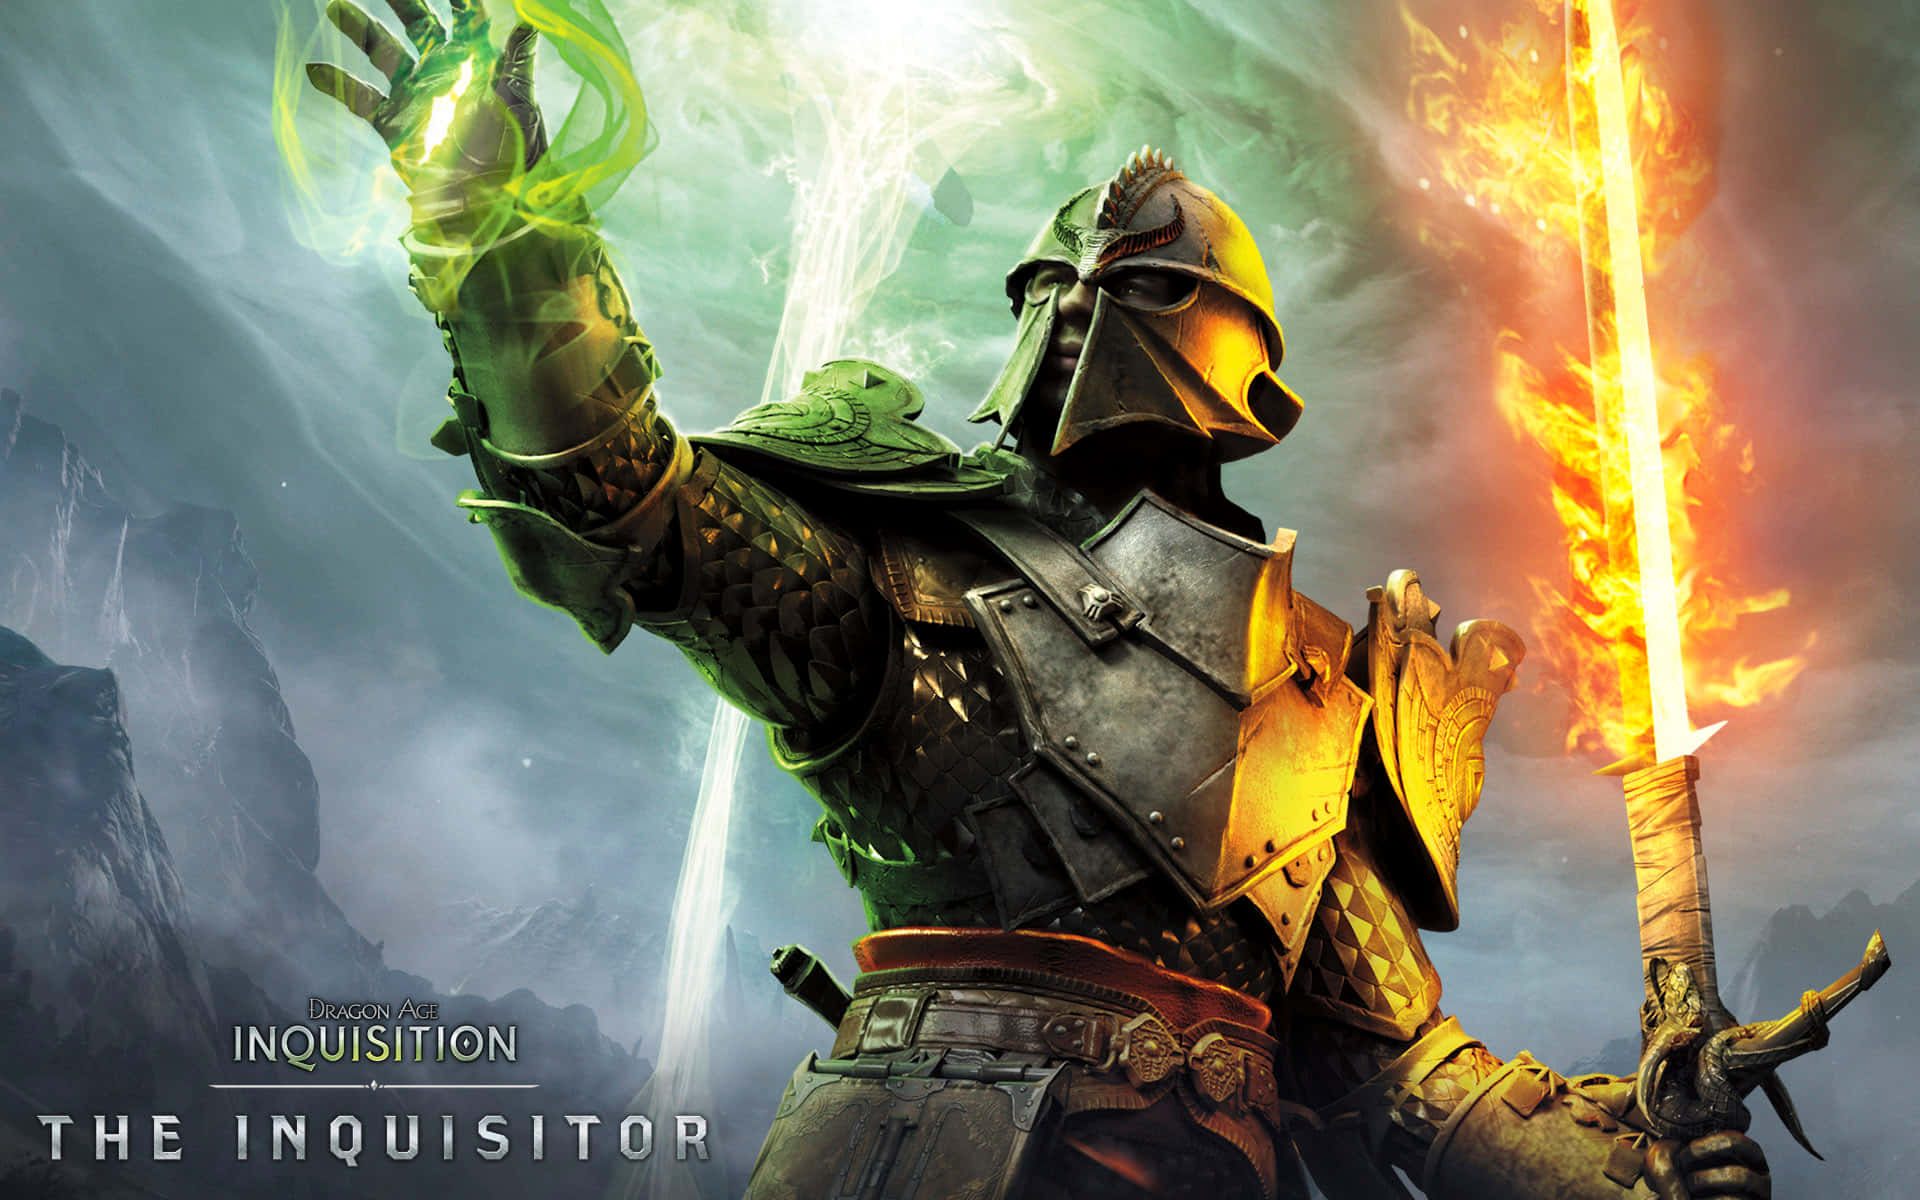 Unleash your power in the world of Dragon Age Inquisition